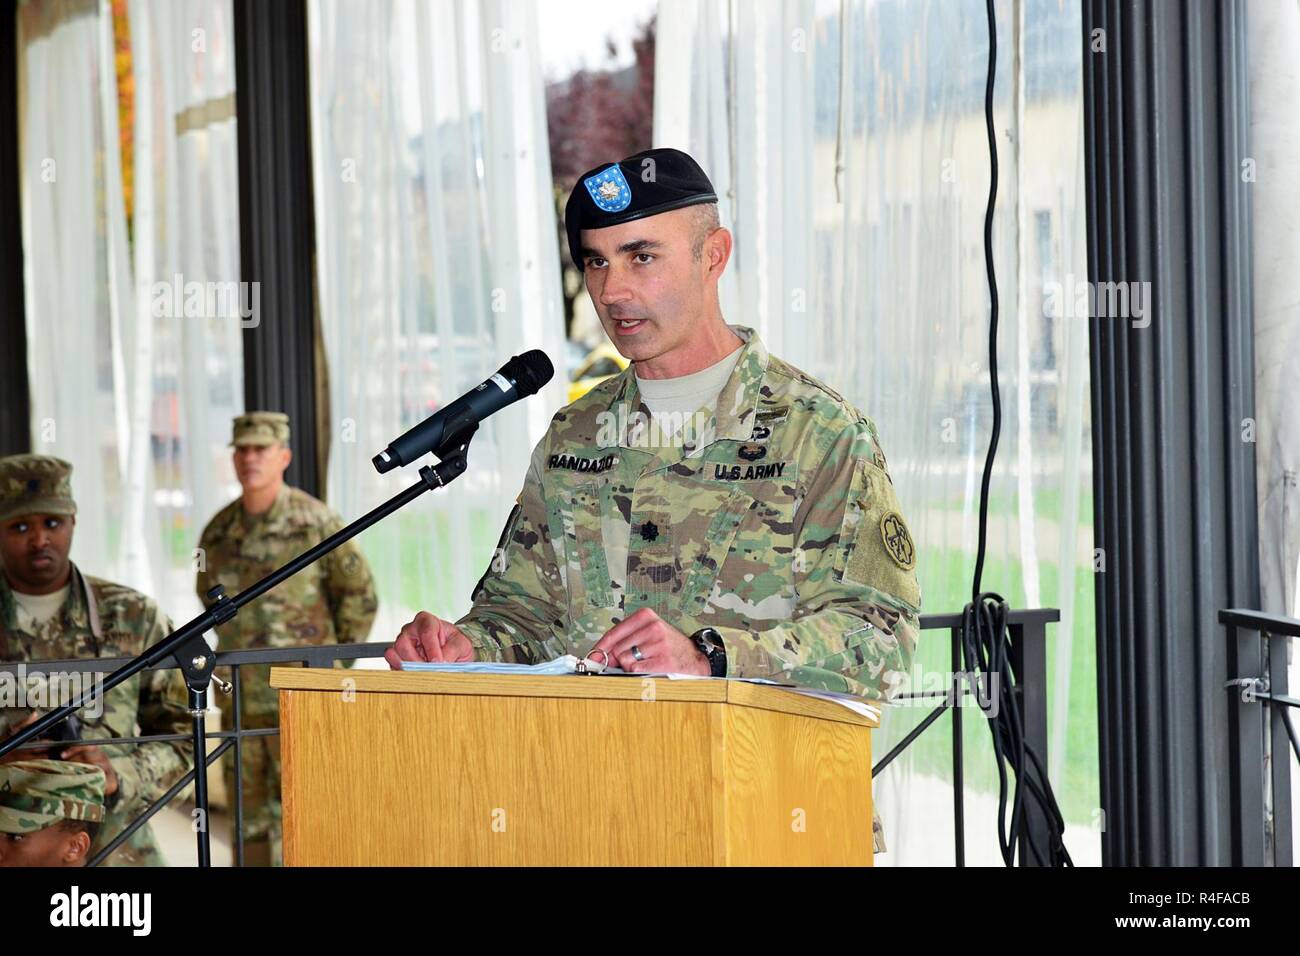 Lt. Col. Dylan Randazzo, 307th Military Intelligence Battalion commander, addresses attendees Oct 24, 2016, during a change of command ceremony for Bravo Company at Caserma Ederle in Vicenza, Italy. Stock Photo